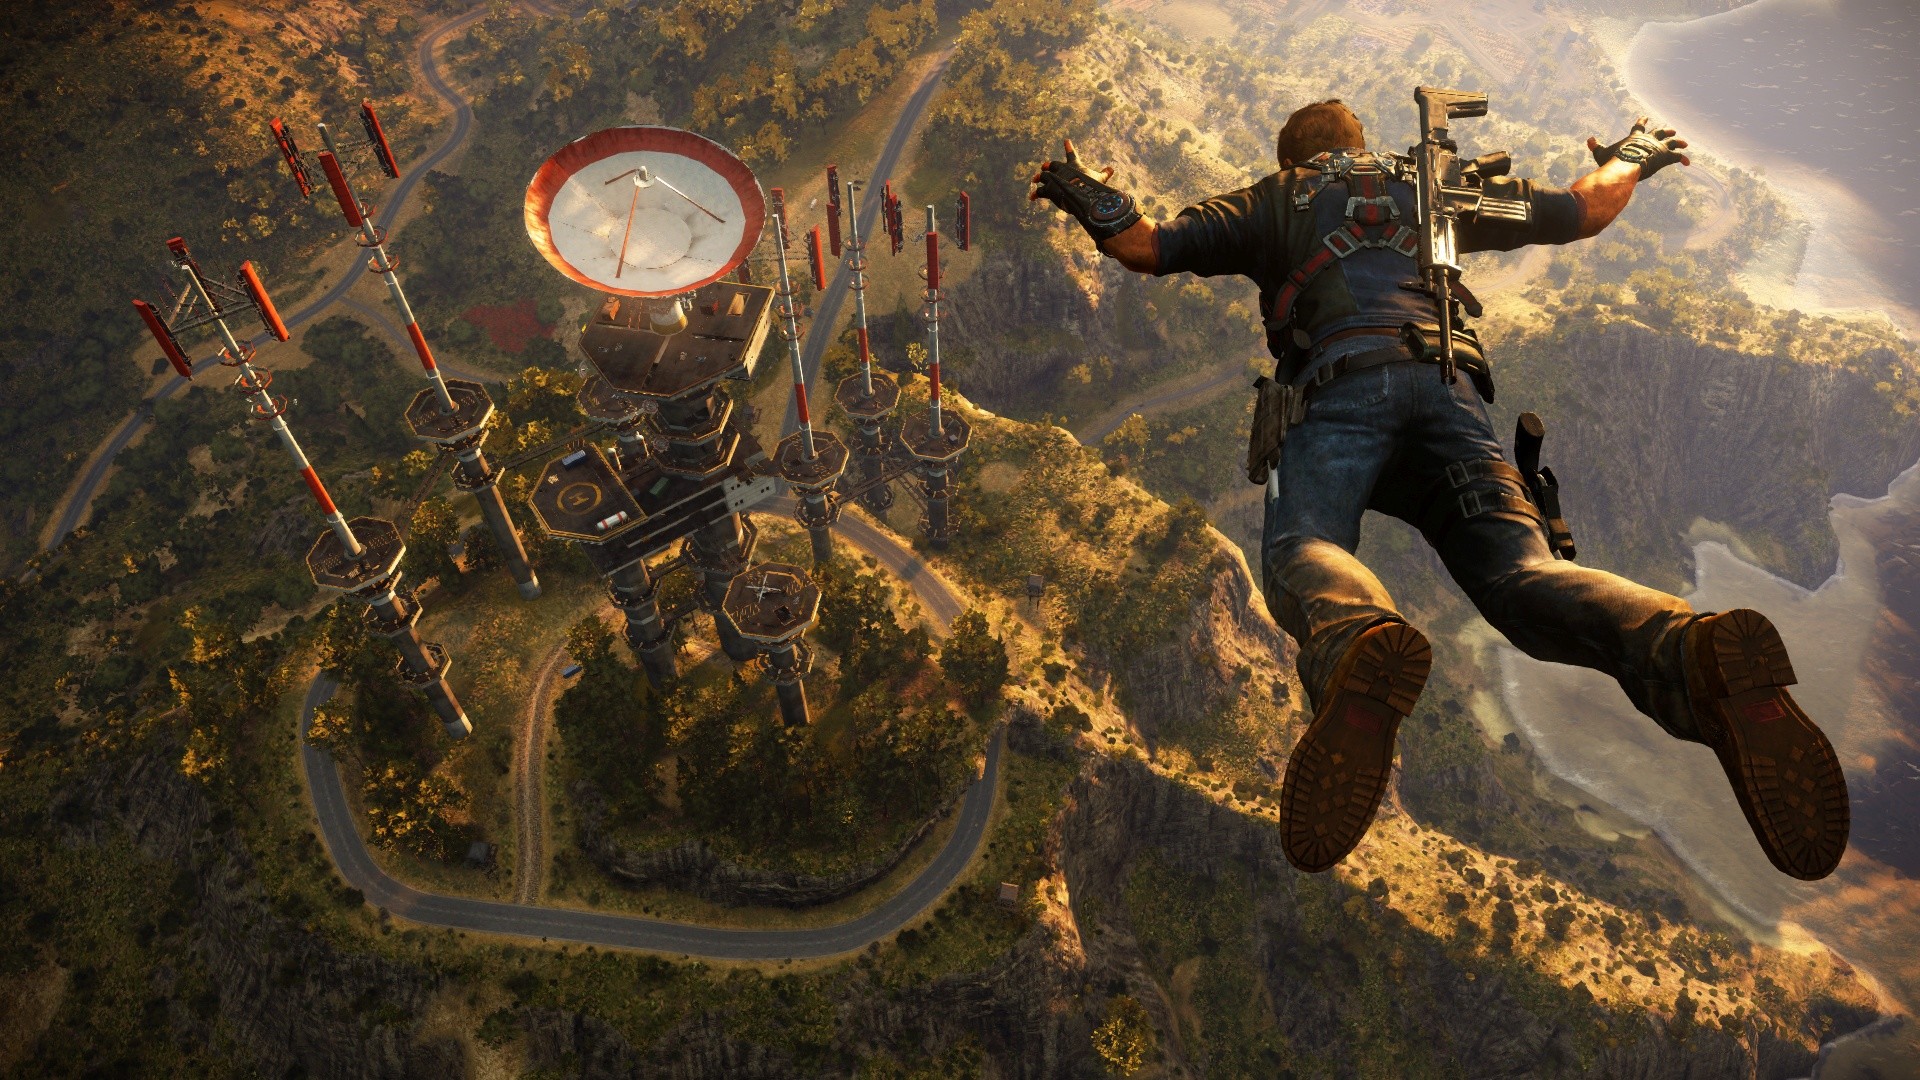 1920x1080 Video Game - Just Cause 3 Rico Rodriguez (Just Cause) Wallpaper